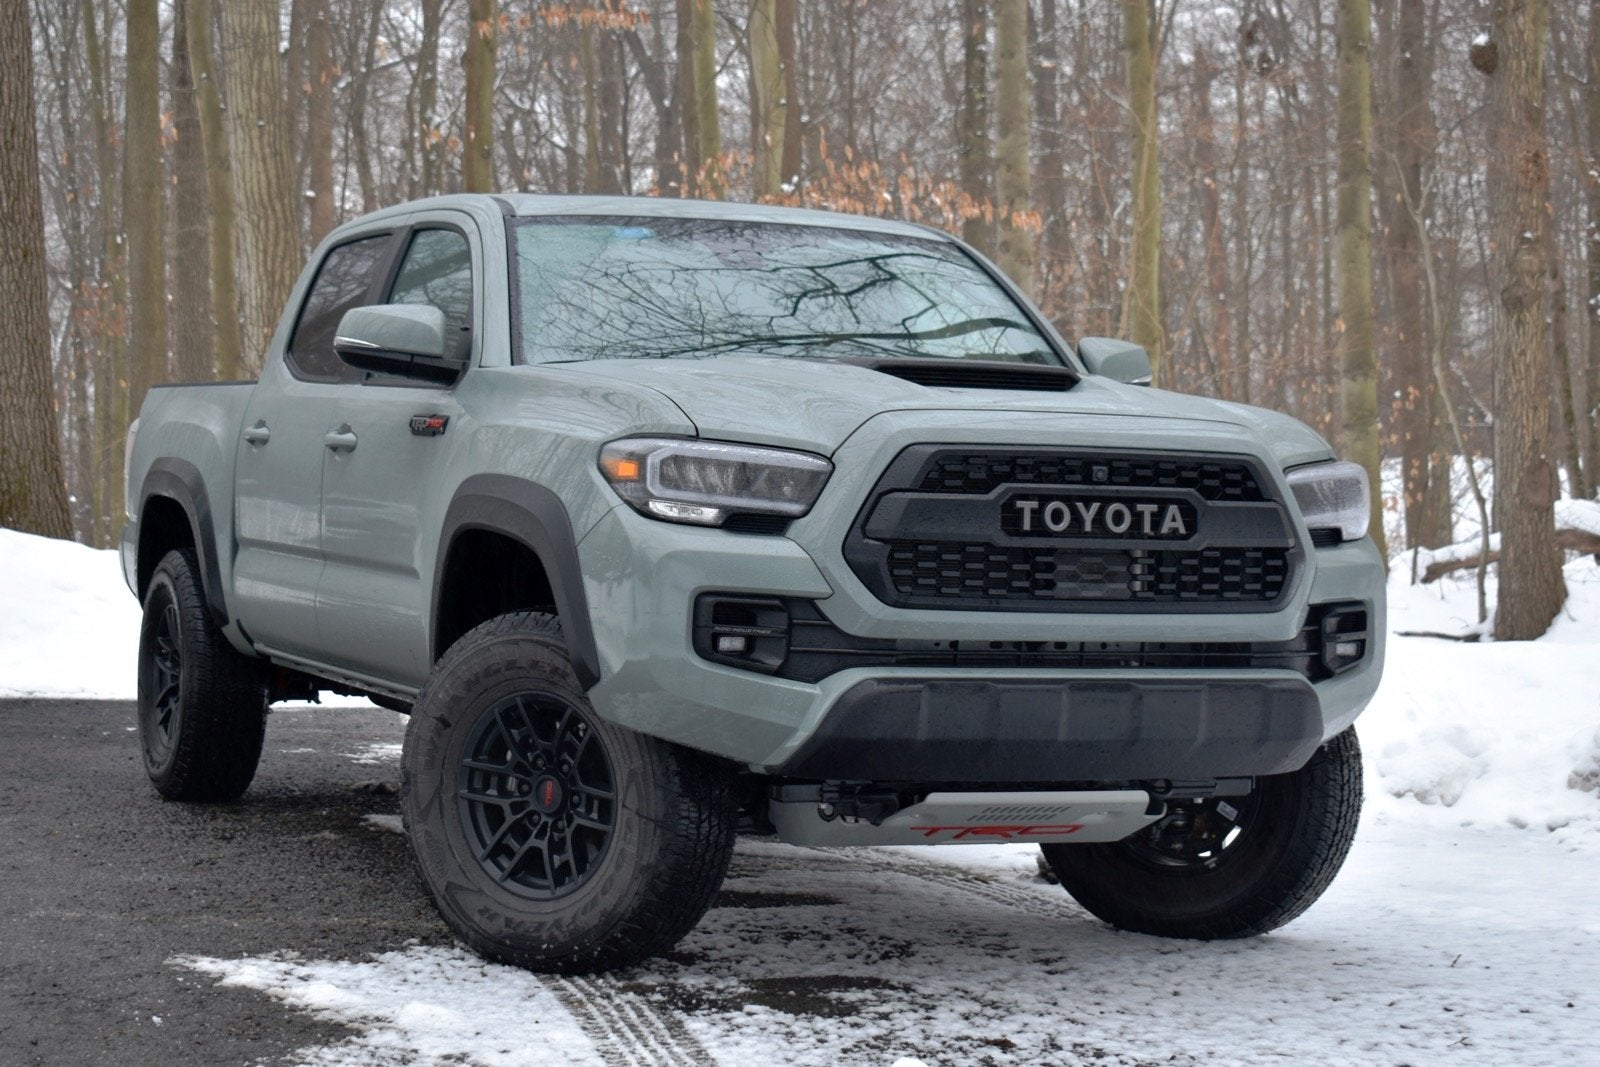 2021 Toyota Tacoma for Sale in Kitchener, ON - CarGurus.ca